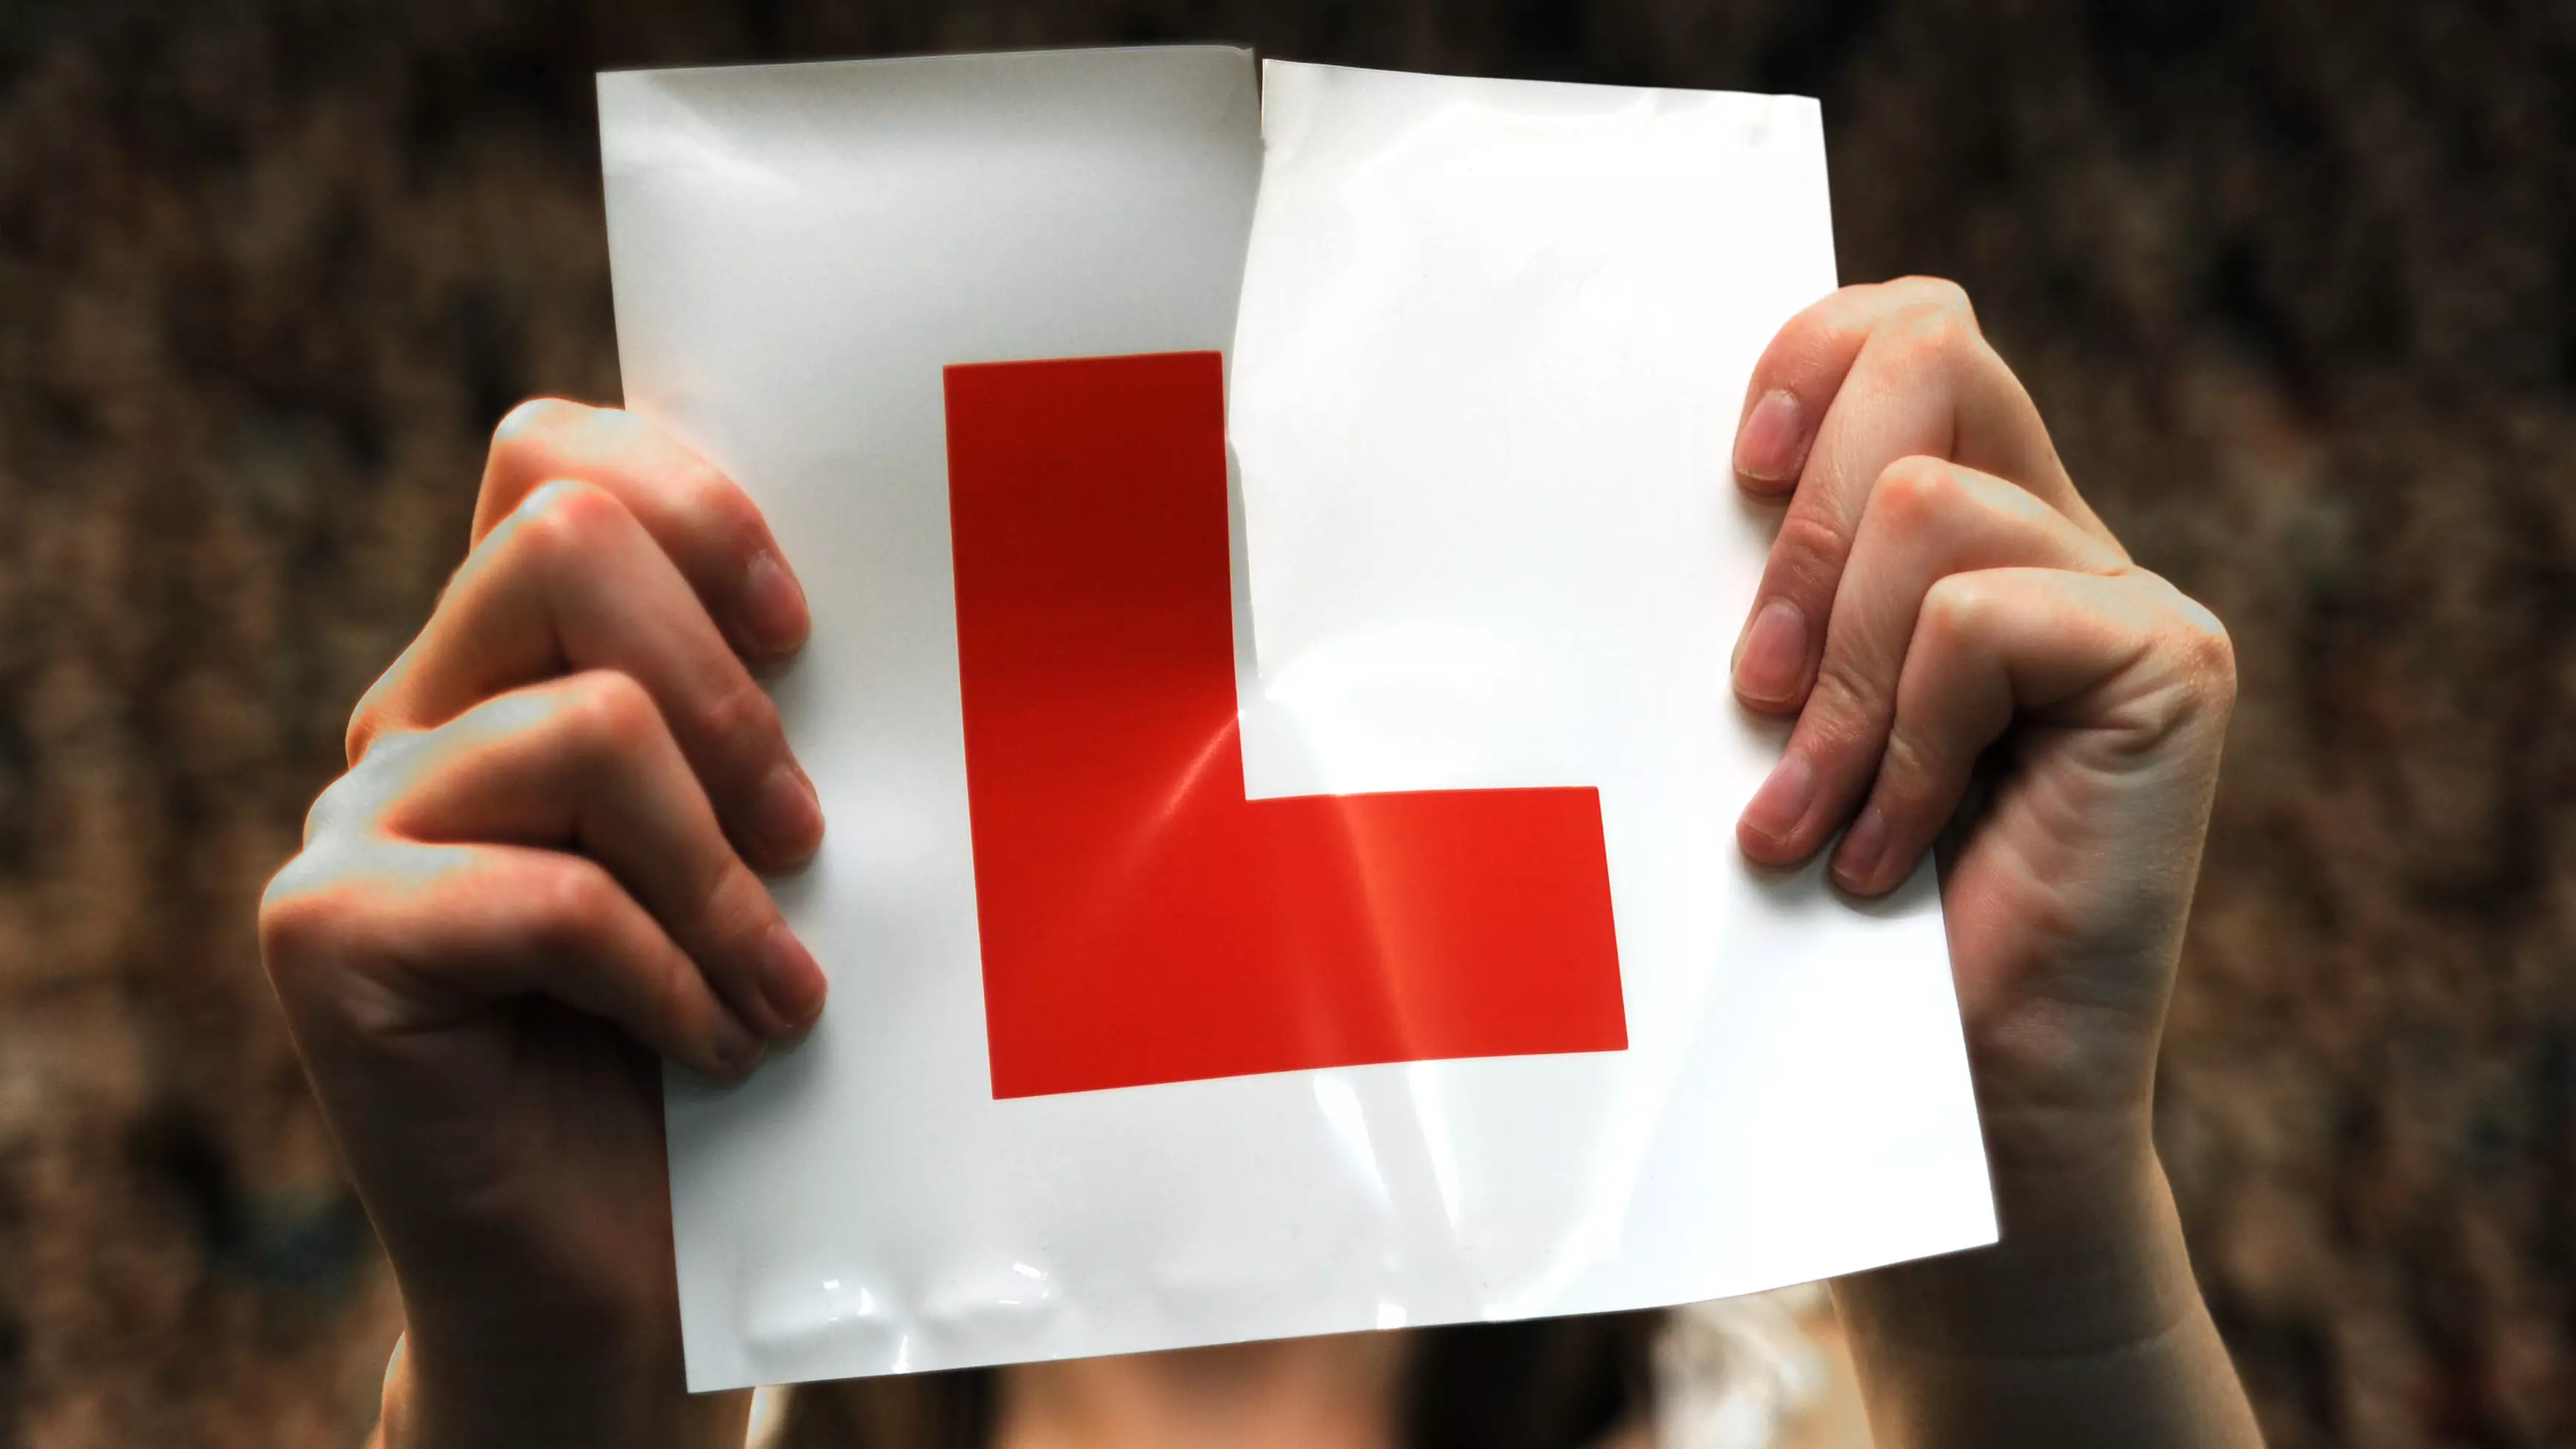 Driving Theory Tests Are Changing In April 2020